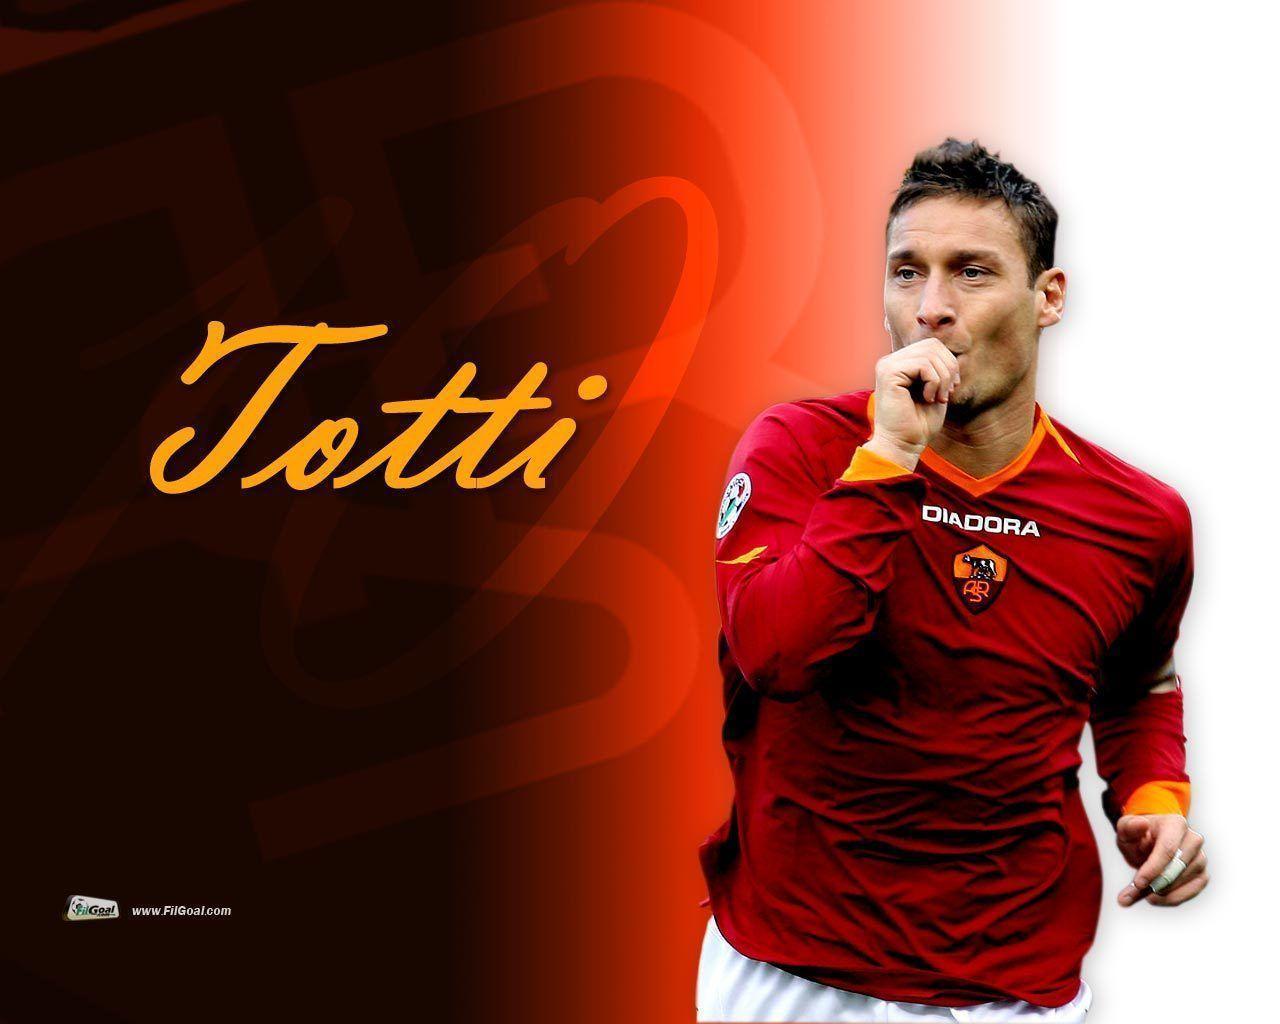 As Roma image totti HD wallpaper and background photo